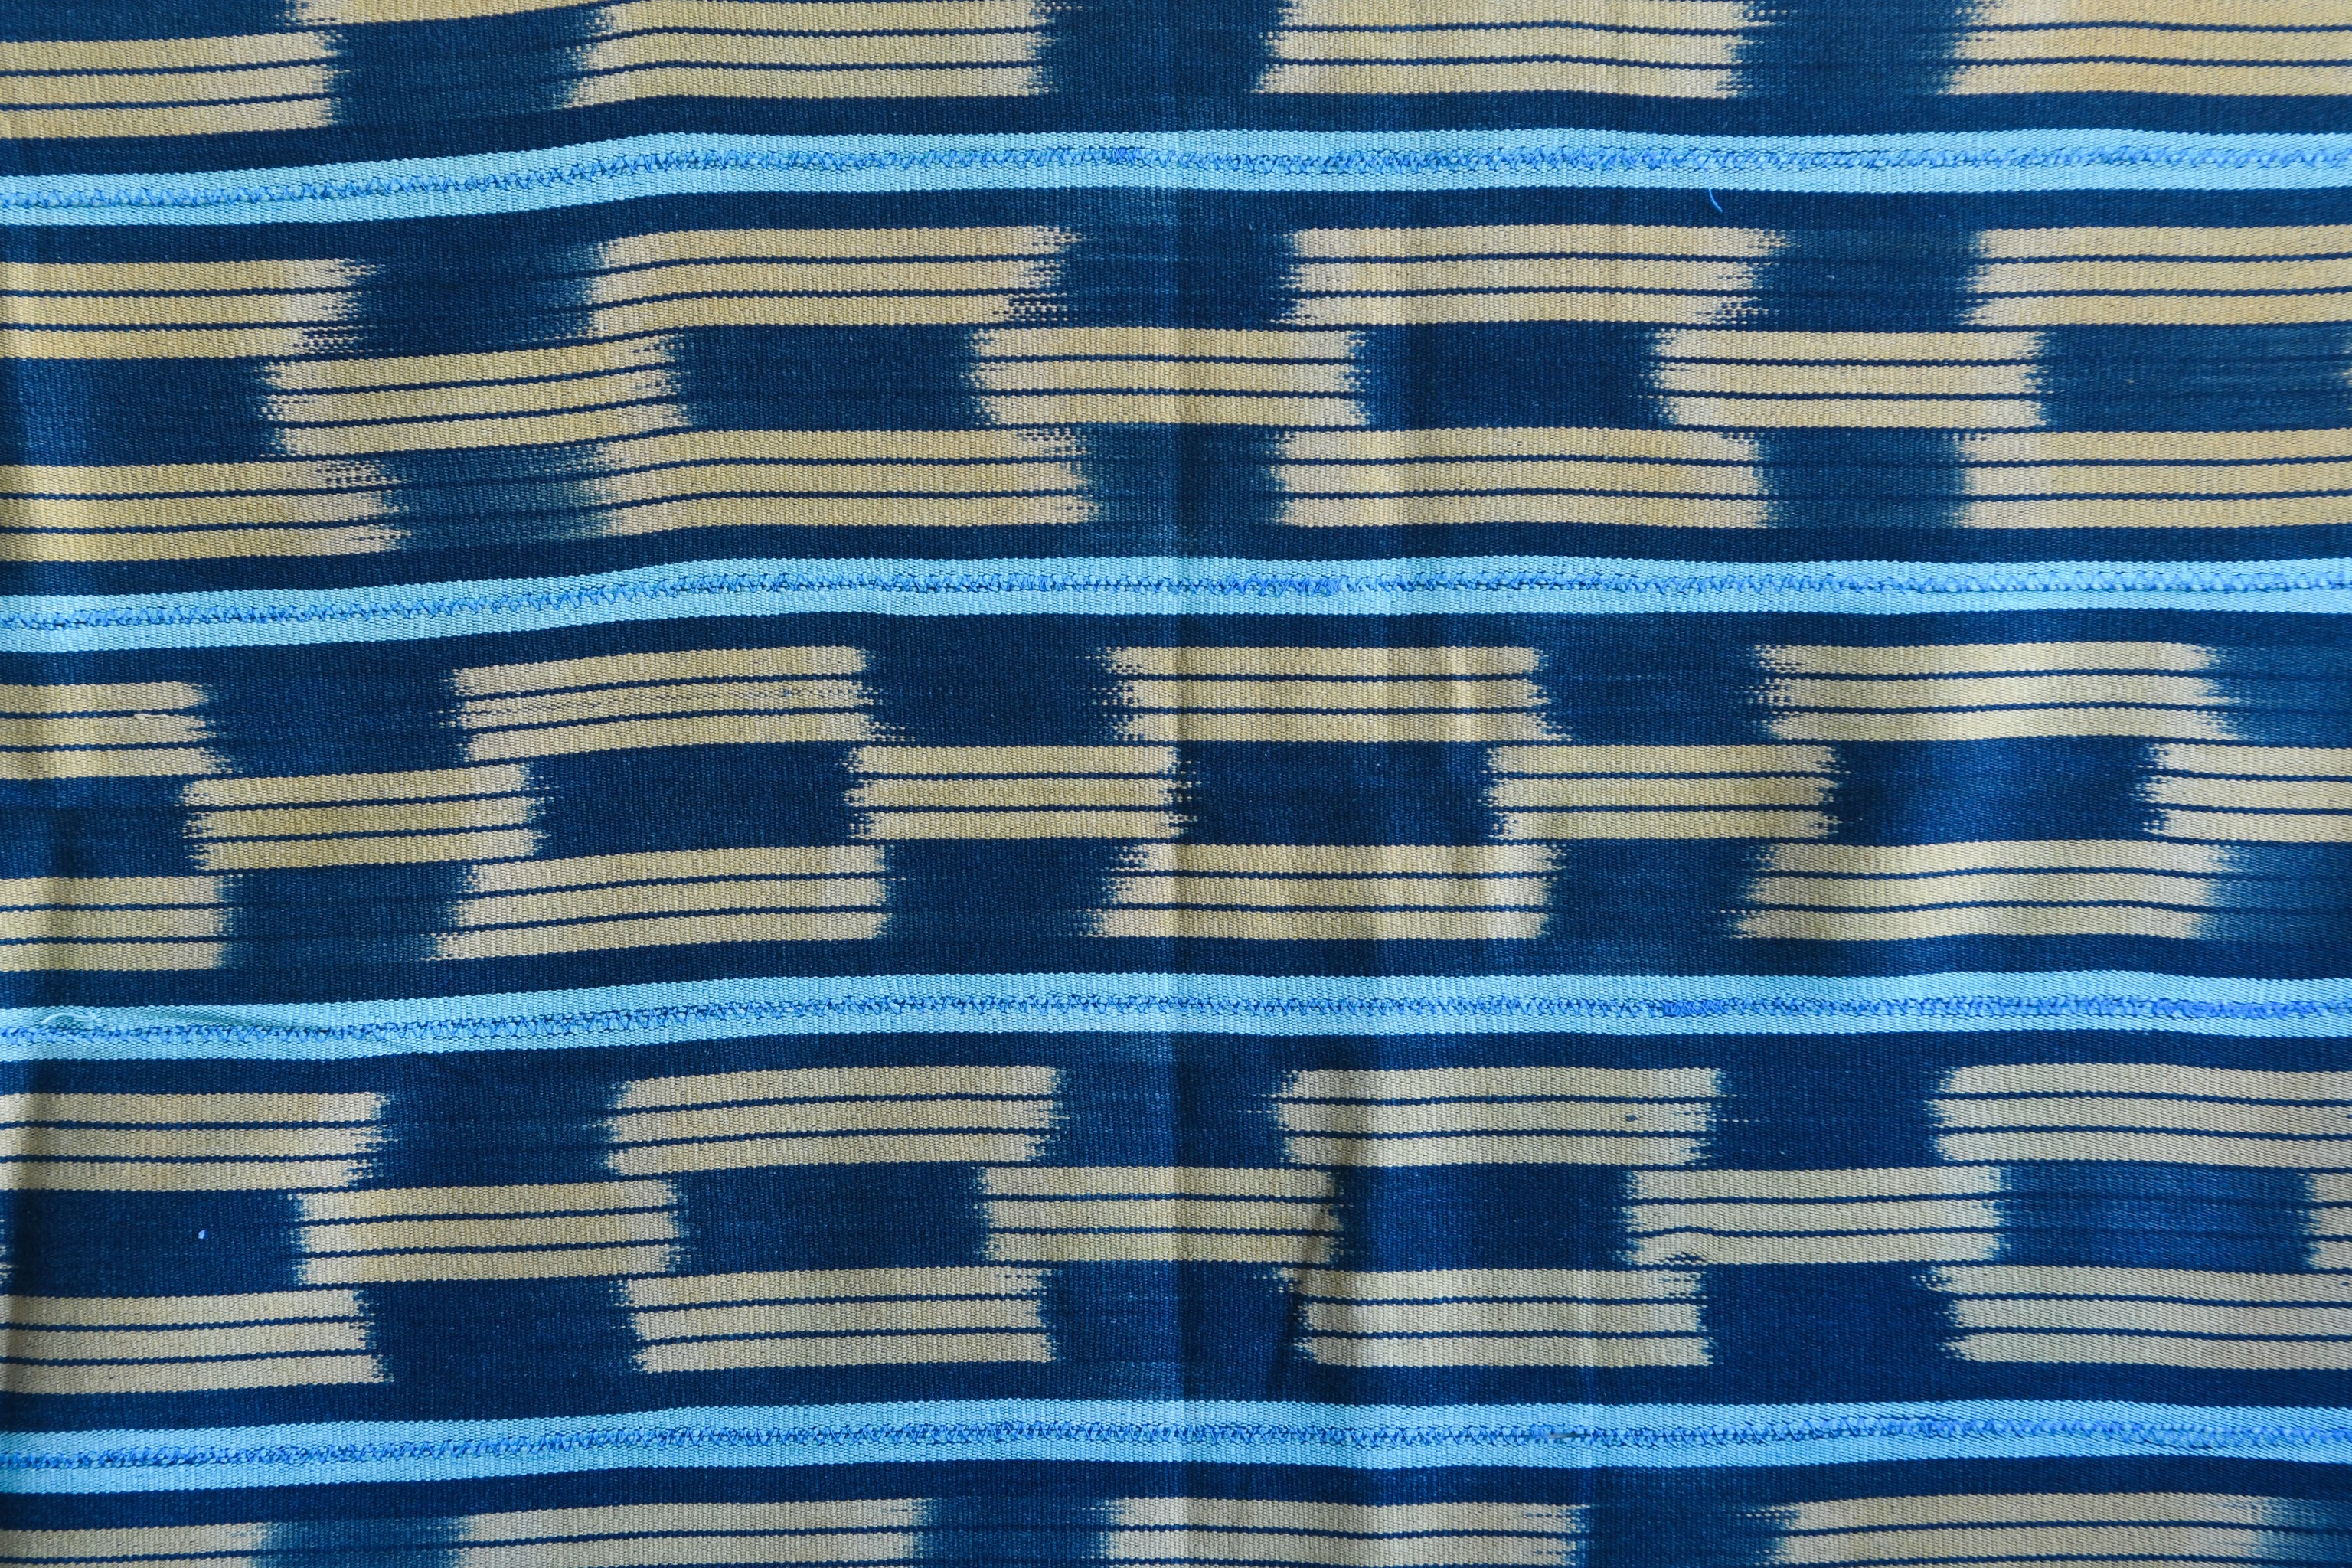 Handcrafted Textiles - Handmade - Contemporary - African Art - Home Decor - Living - Indigo Tie Dyed Ikat Fabric - Crafted African Cotton Textile - Vintage Baule Design